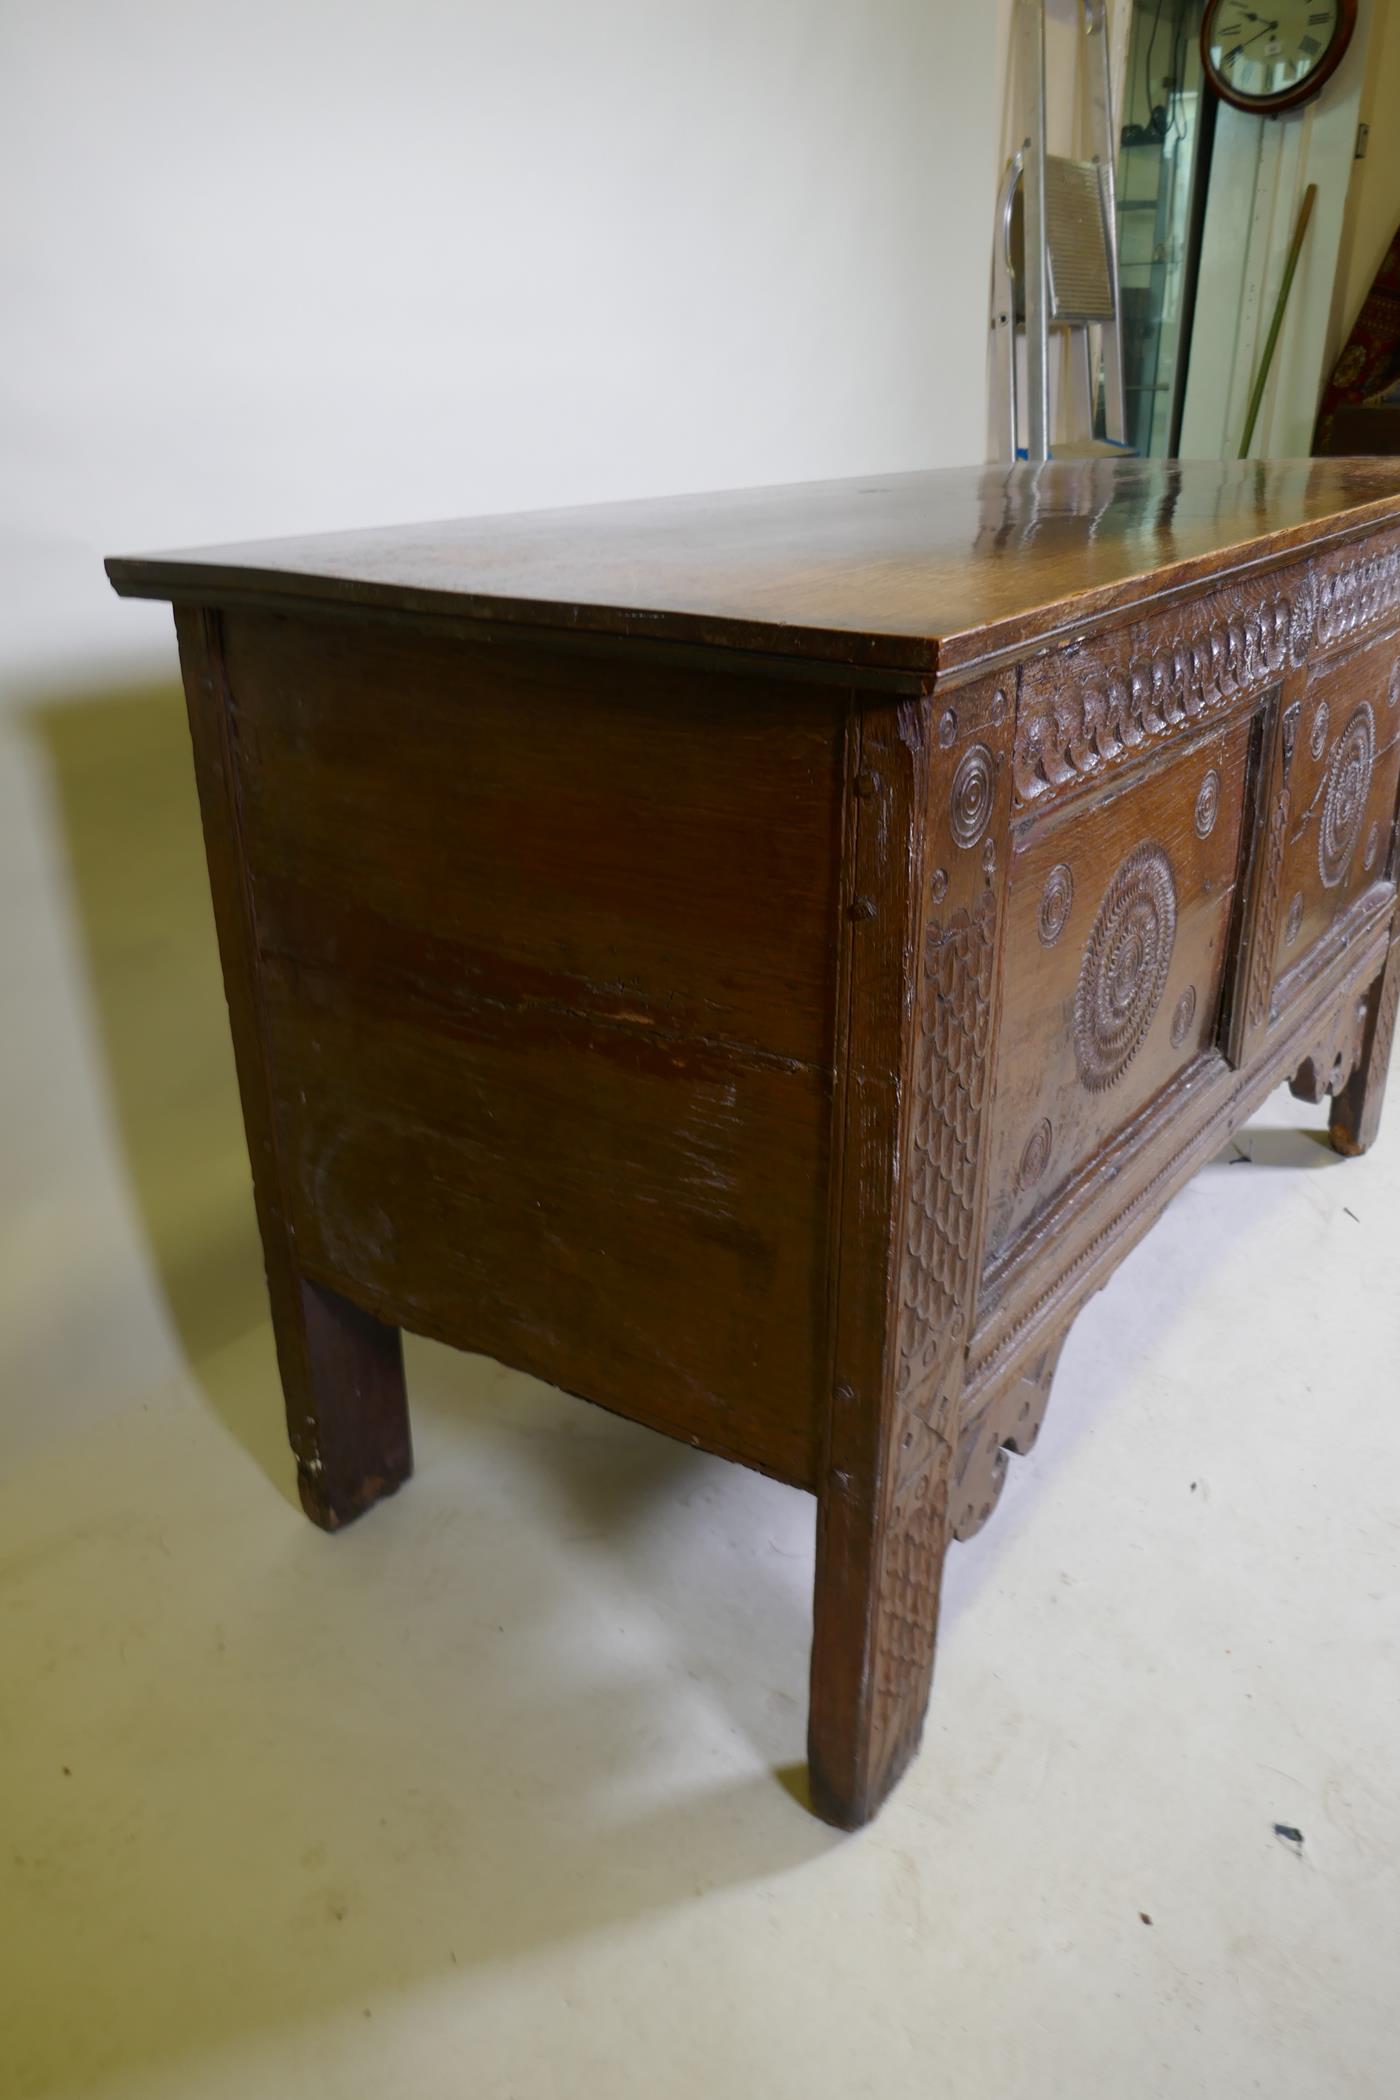 An C18th continental oak coffer, two panelled front with chip carved decoration under a sea scroll - Image 5 of 5